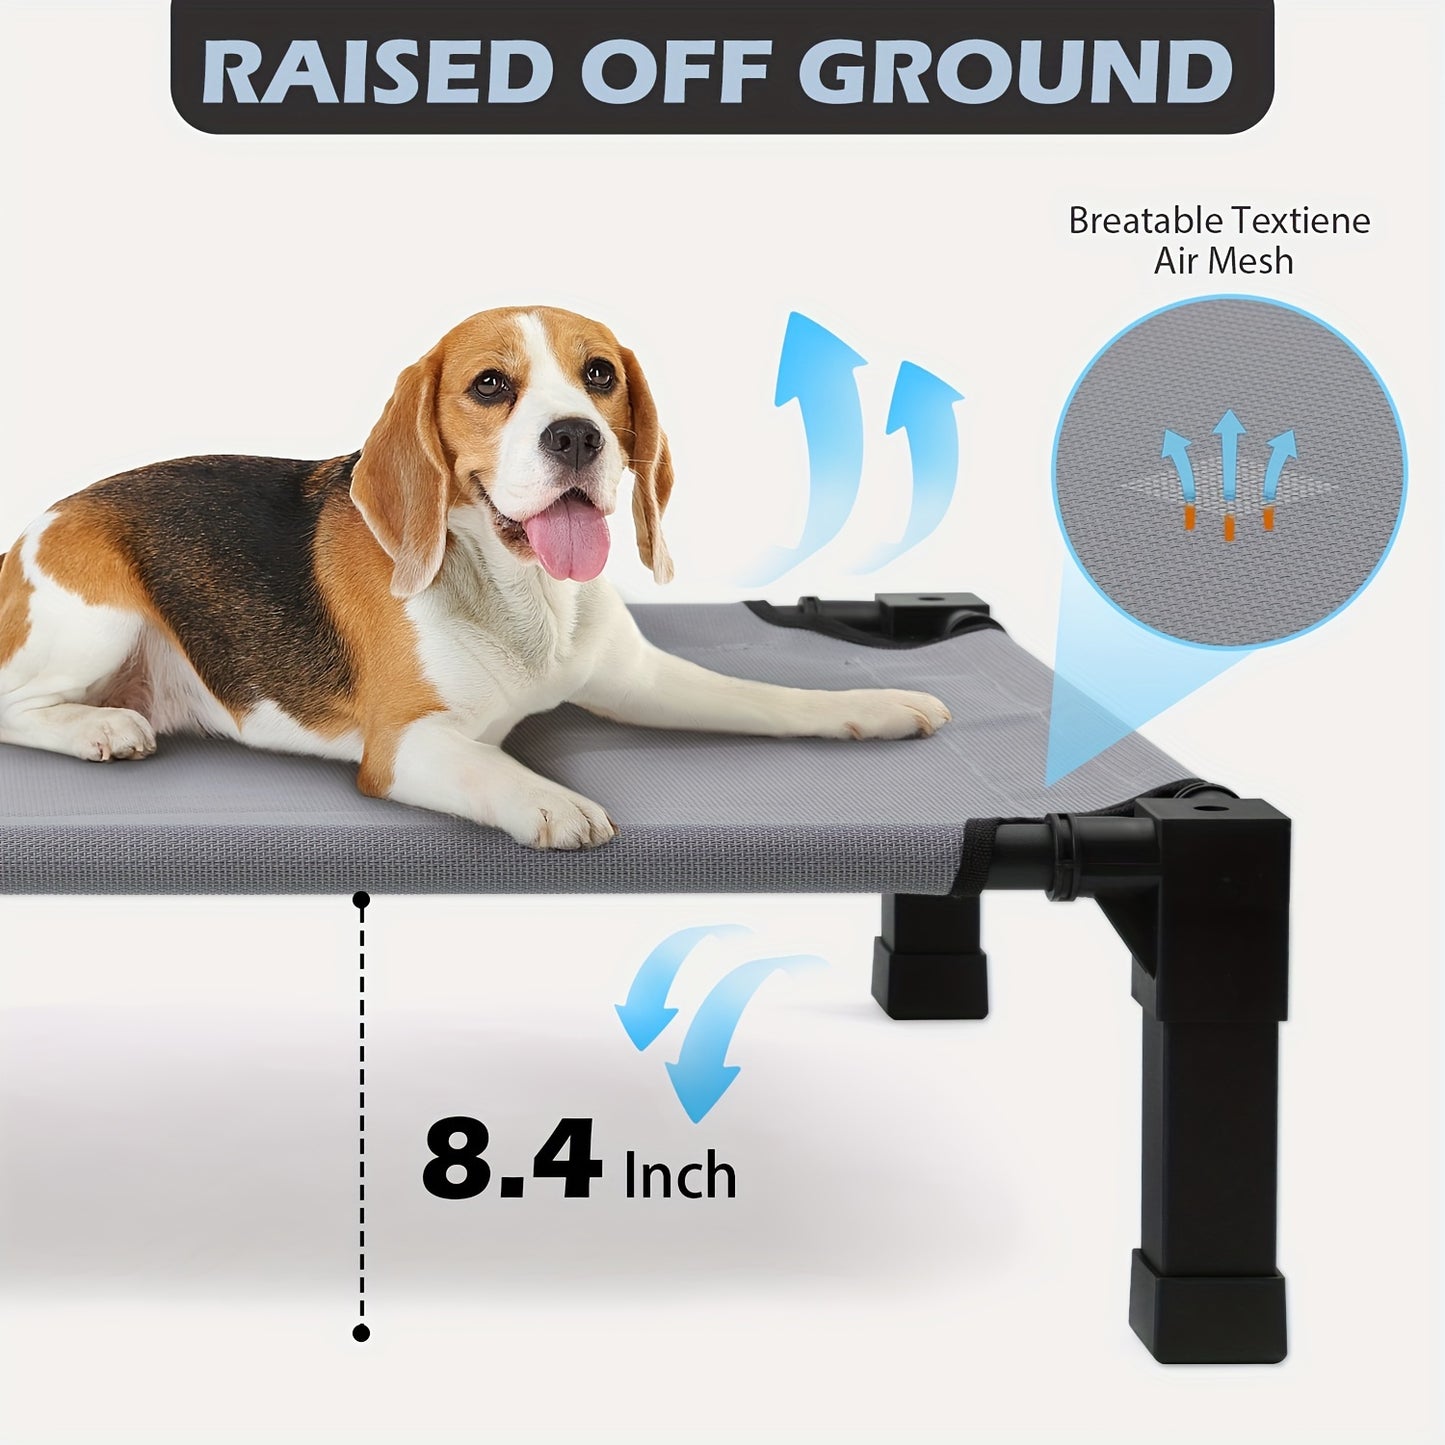 Elevated Dog Bed with Canopy and Removable Shade